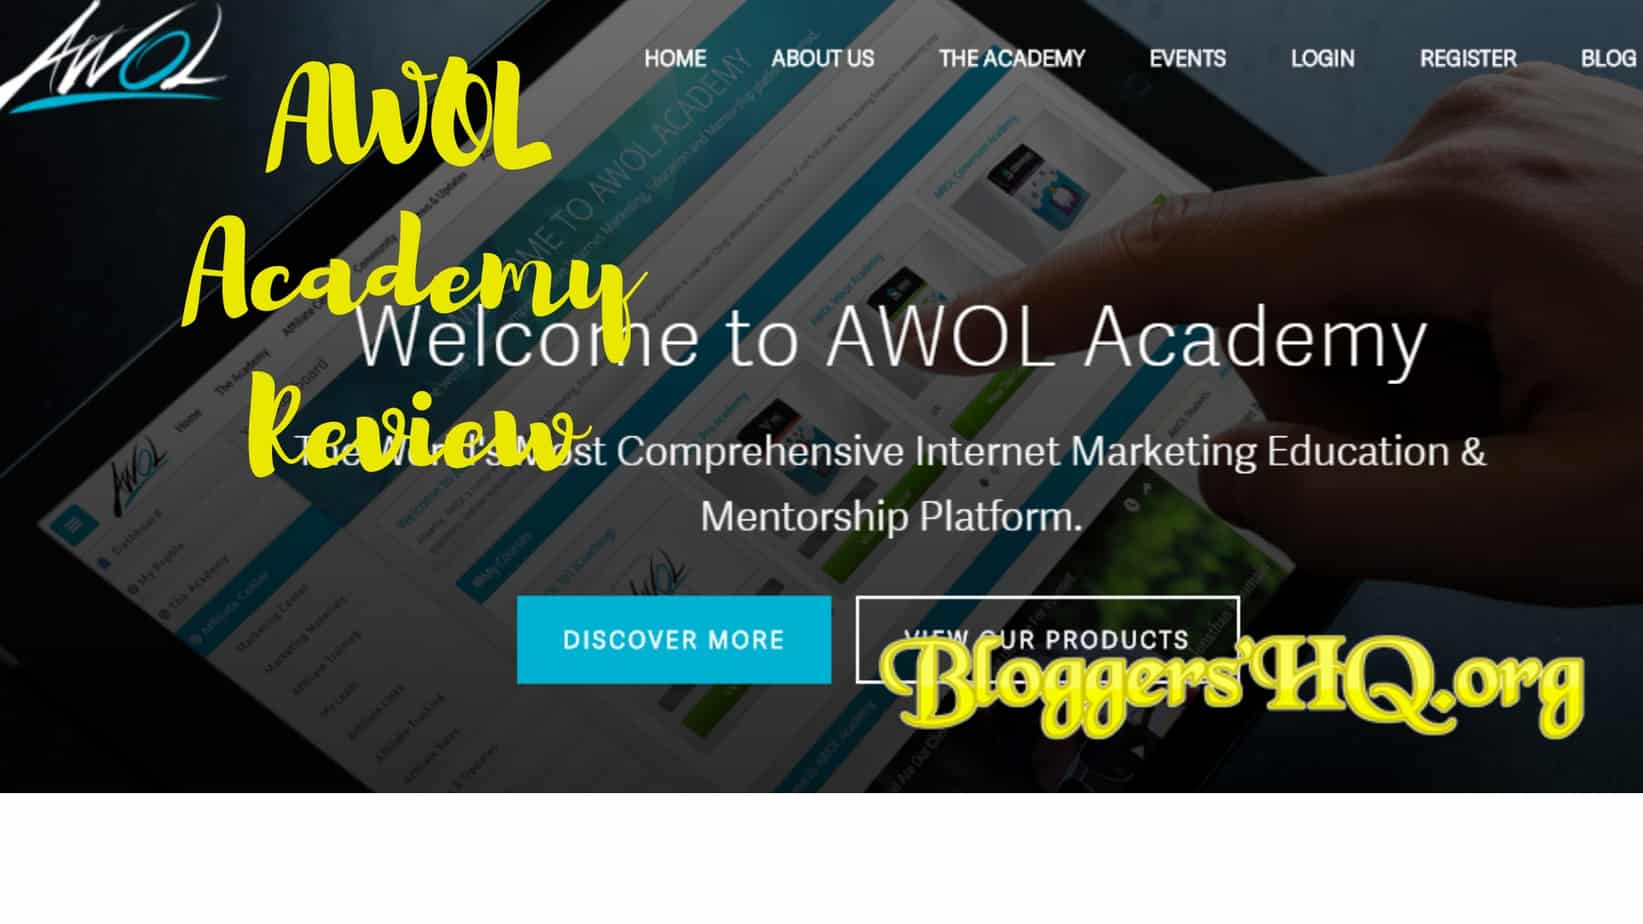 AWOL Academy: Is it Worth the High Price Tag?